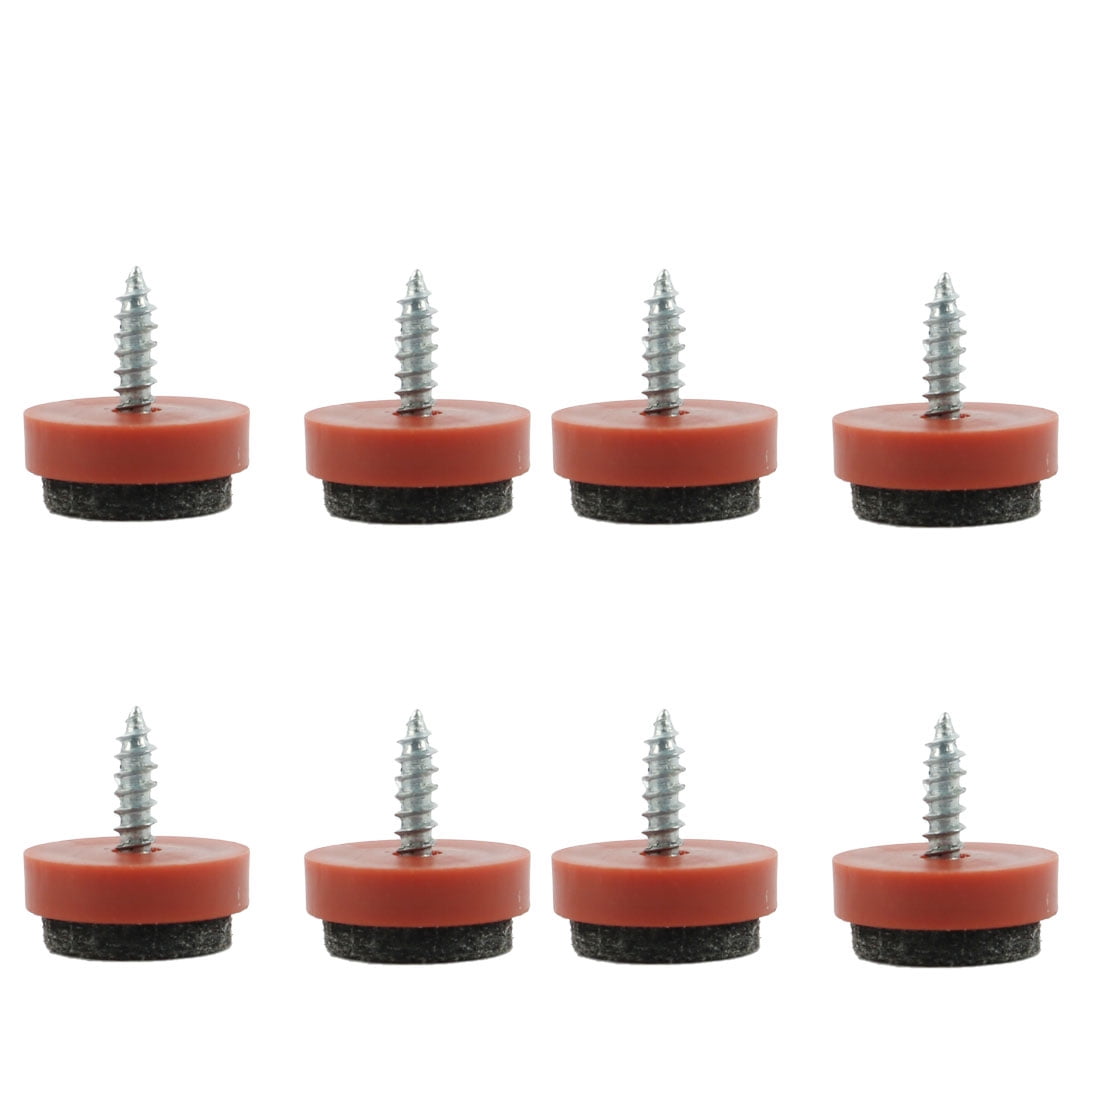 Furniture Feet Nail Protector Screw-in 22mm Dia for Wooden Table Chair Leg 30pcs 